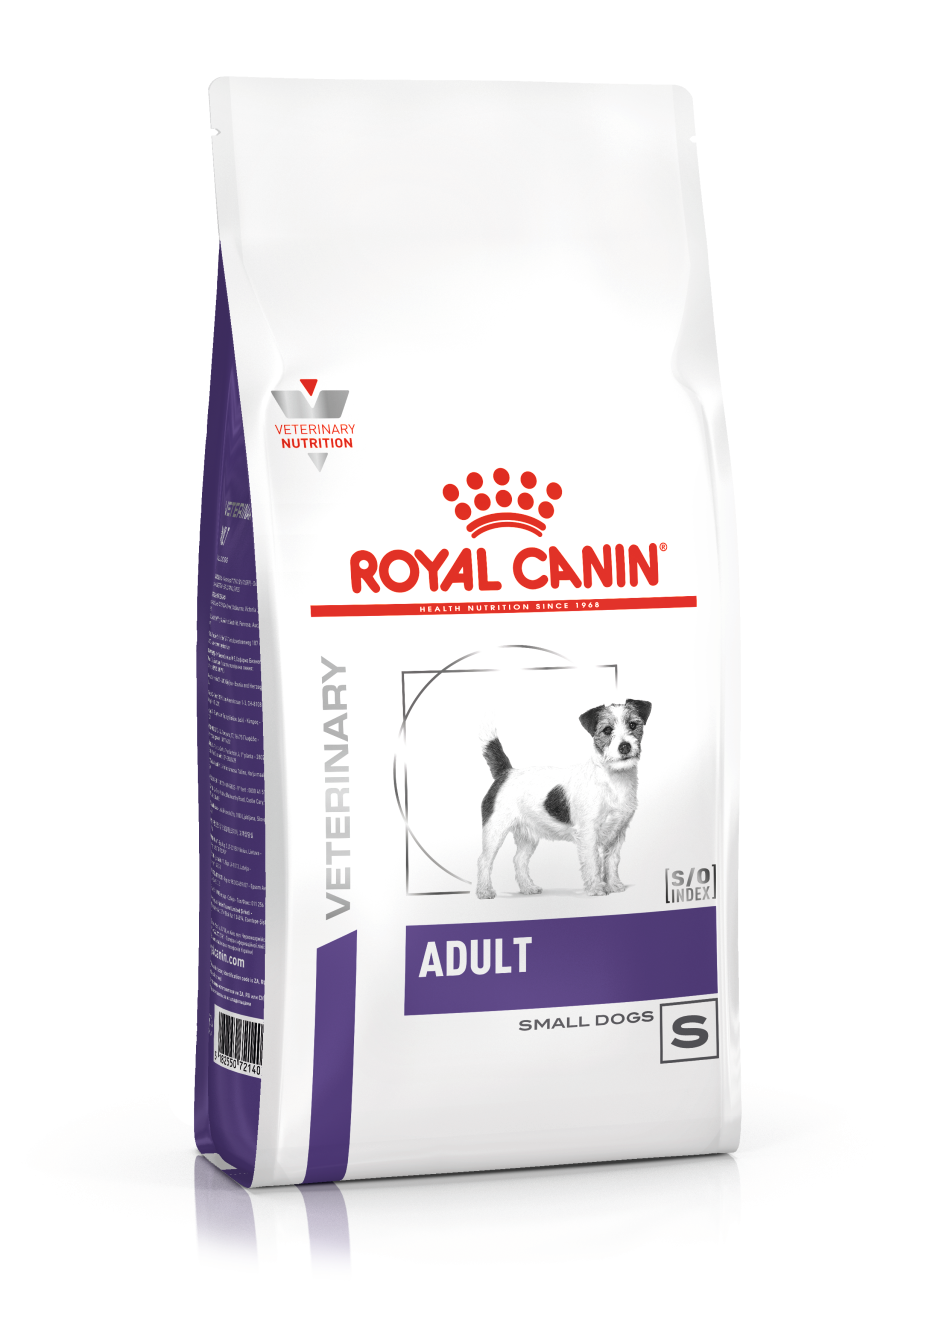 Royal canin adult Small Dog 1 x 2 kg